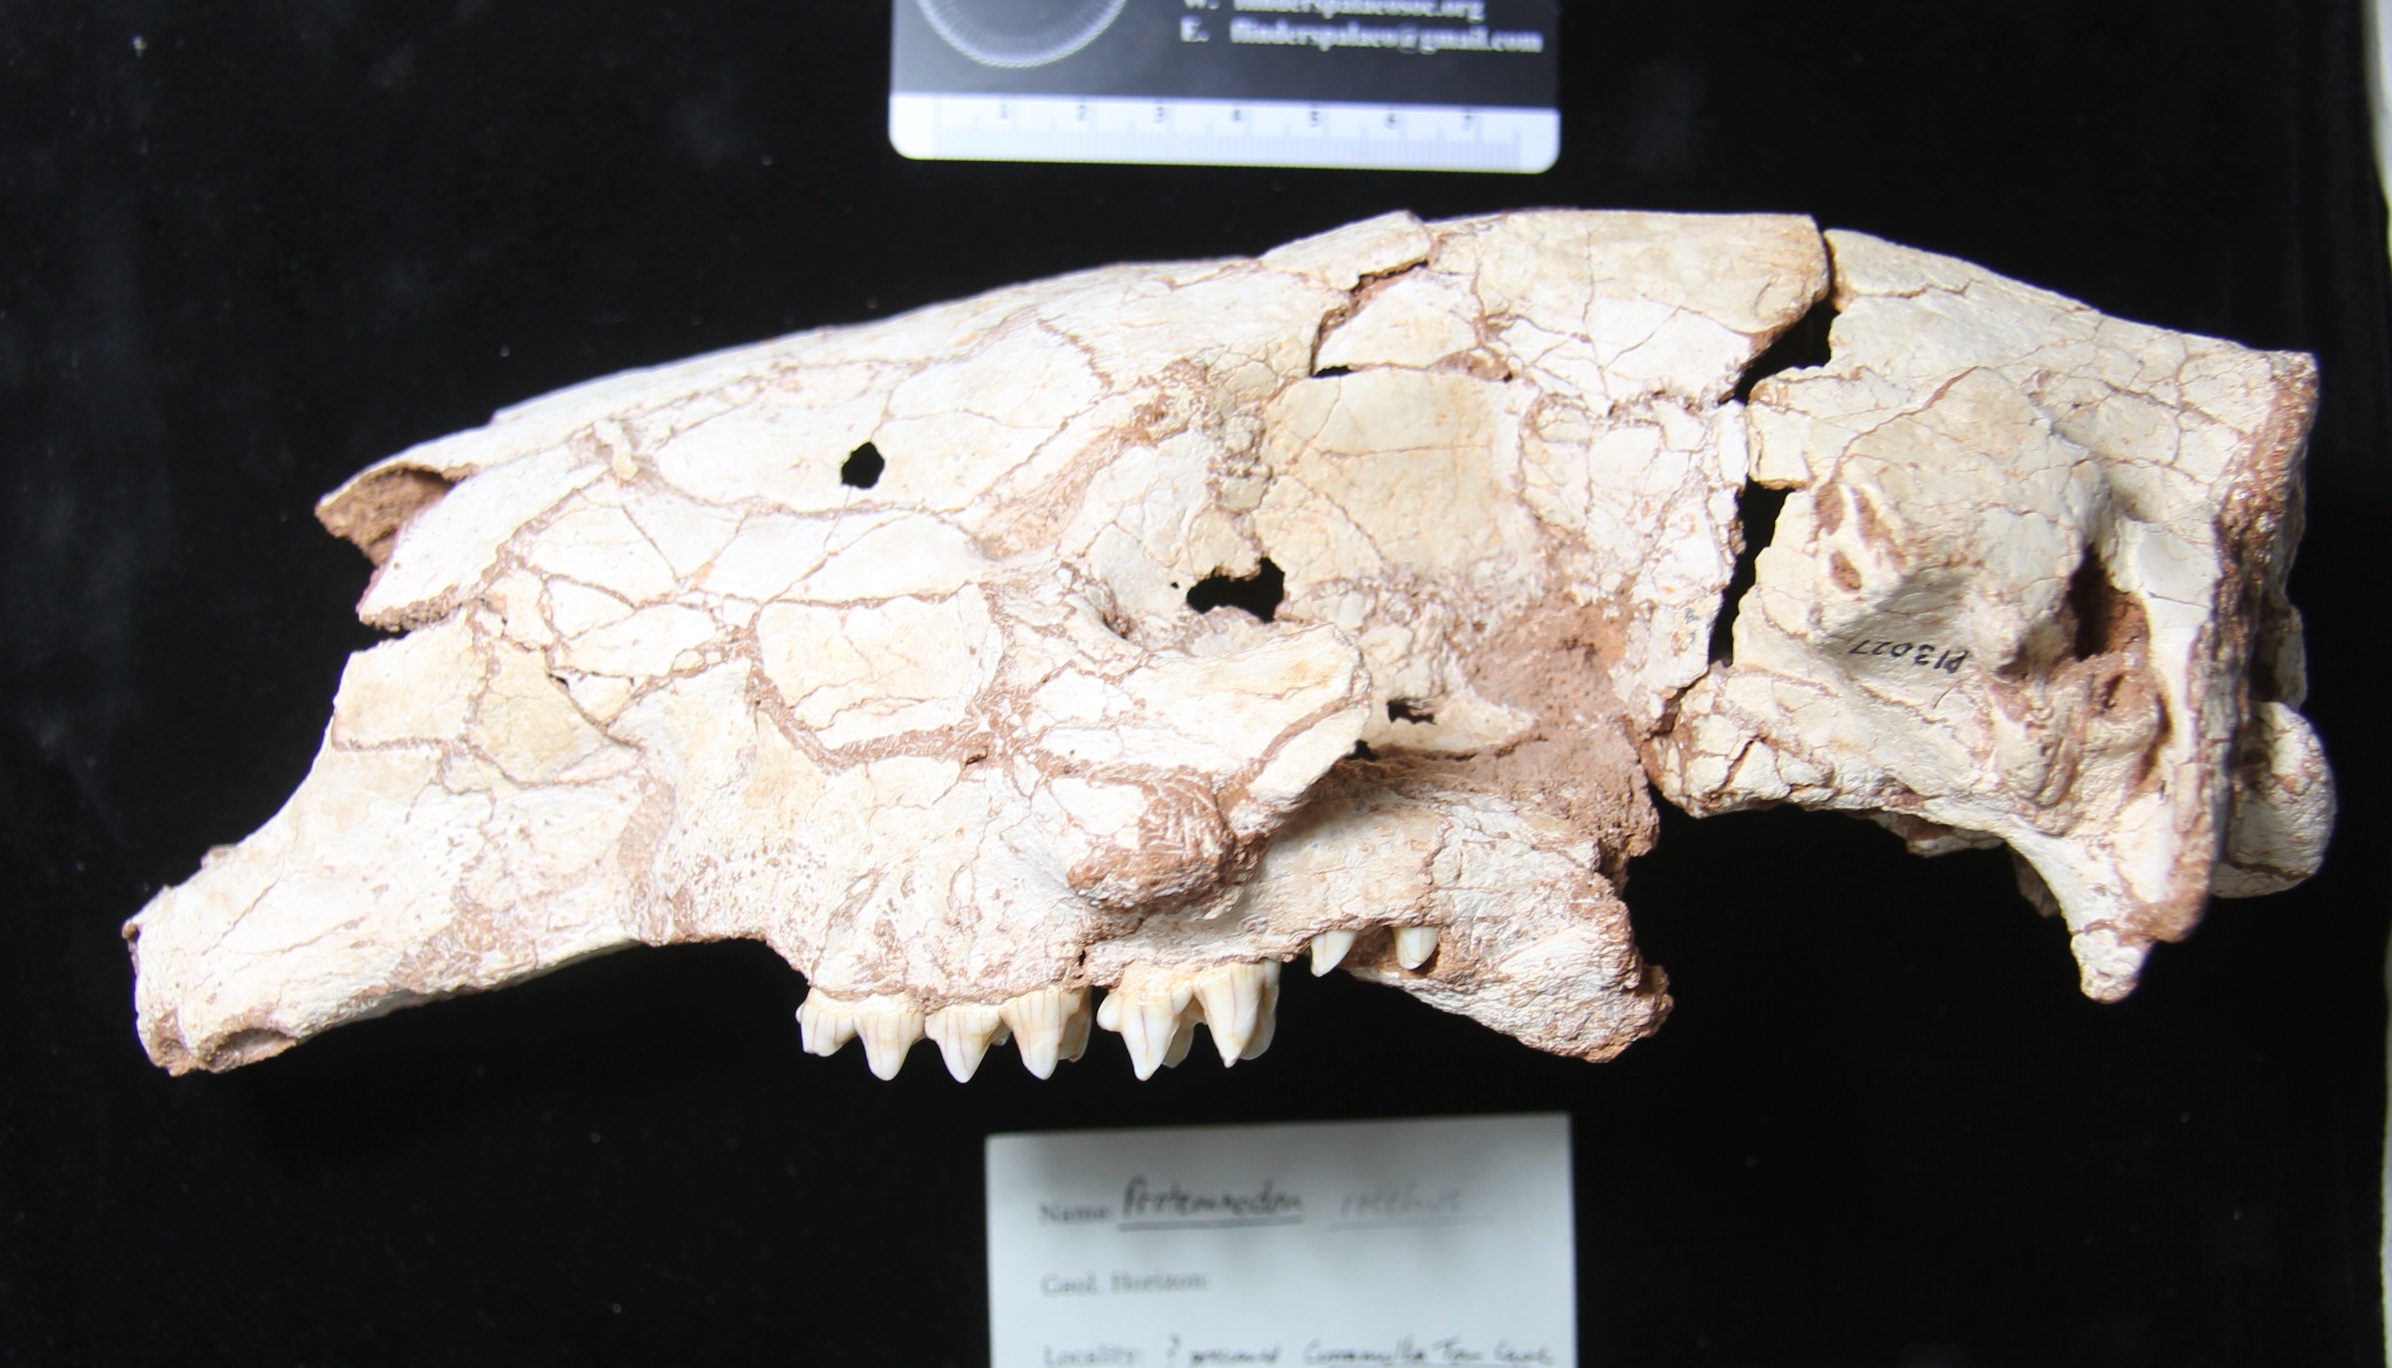 A partial skull of Protemnodon brehus from Curramulka Town Well Cave, Yorke Peninsula, SA. Photo by I. A. R. Kerr 2019.